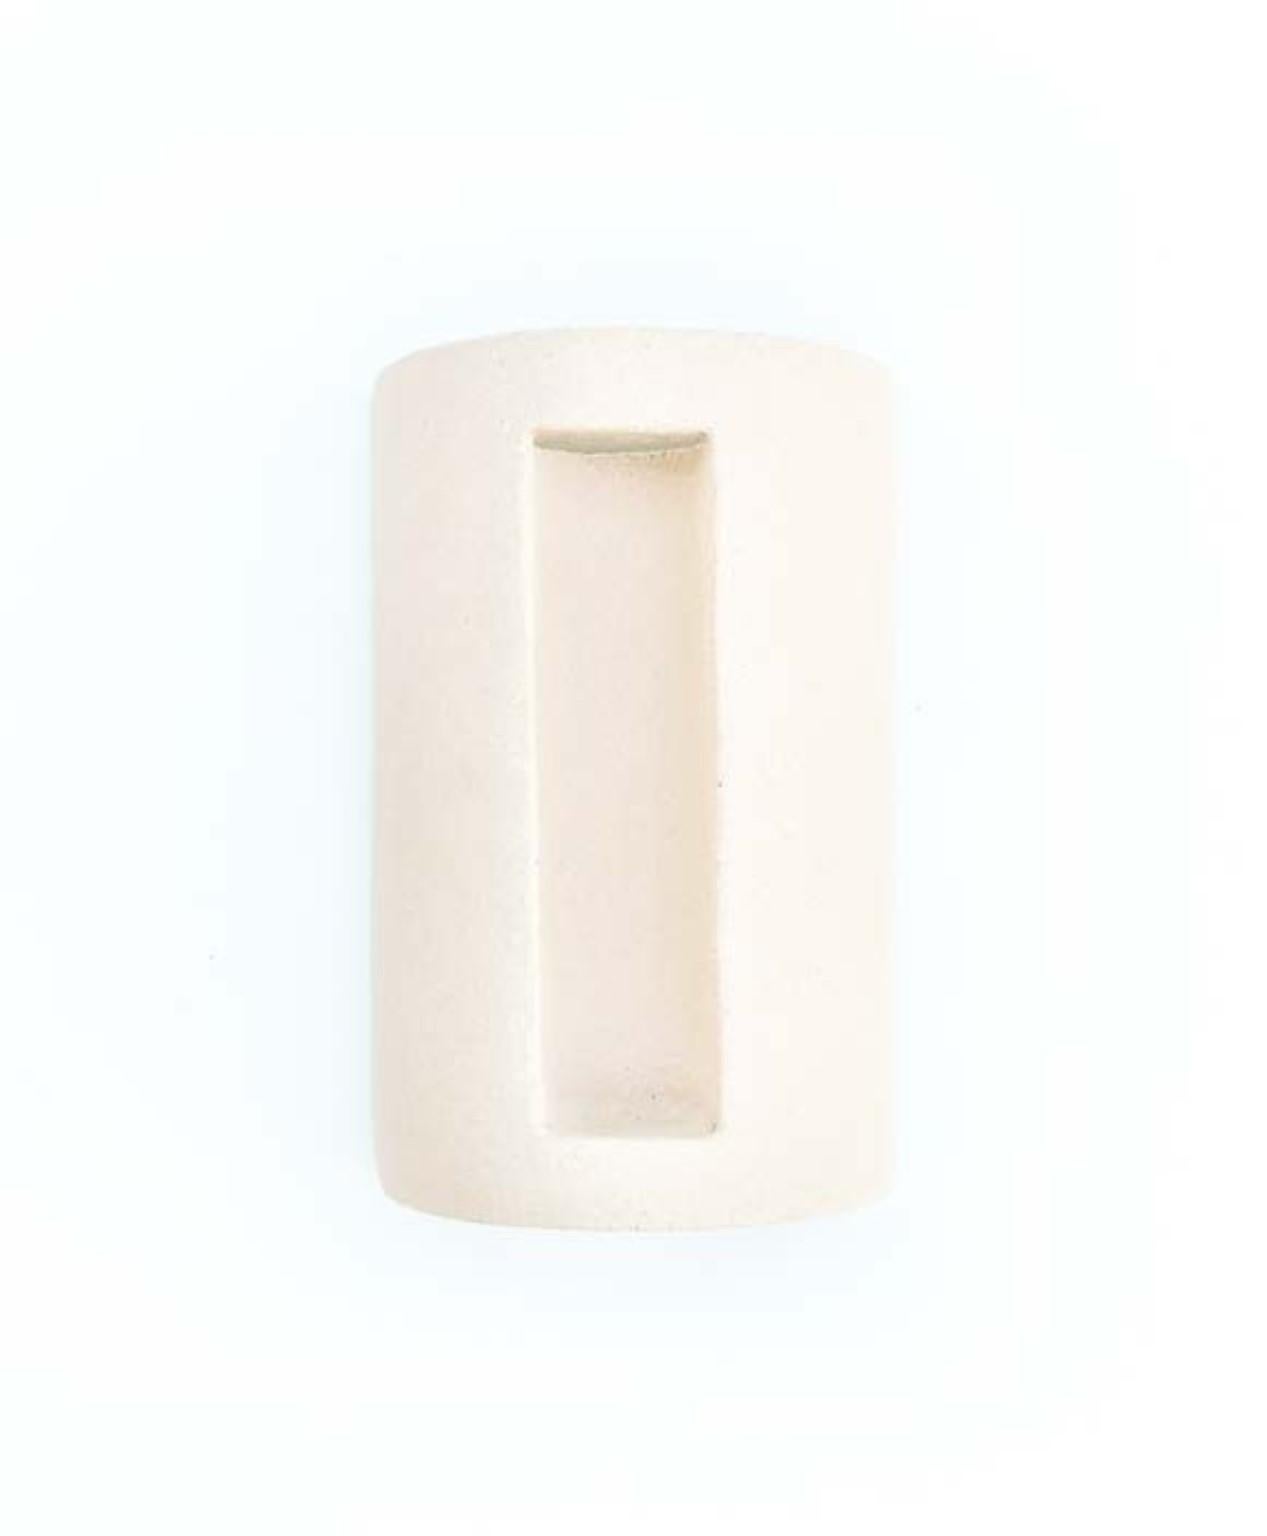 Koilos wall light by Lisa Allegra
Dimensions: W 32 x D 14 x H 22 cm
Materials: Clay

Born in 1986 in Paris, Lisa Allegra has earned in 2010 a degree in furniture design from the École Supérieure des Arts Décoratifs. She has worked for Tsé&Tsé